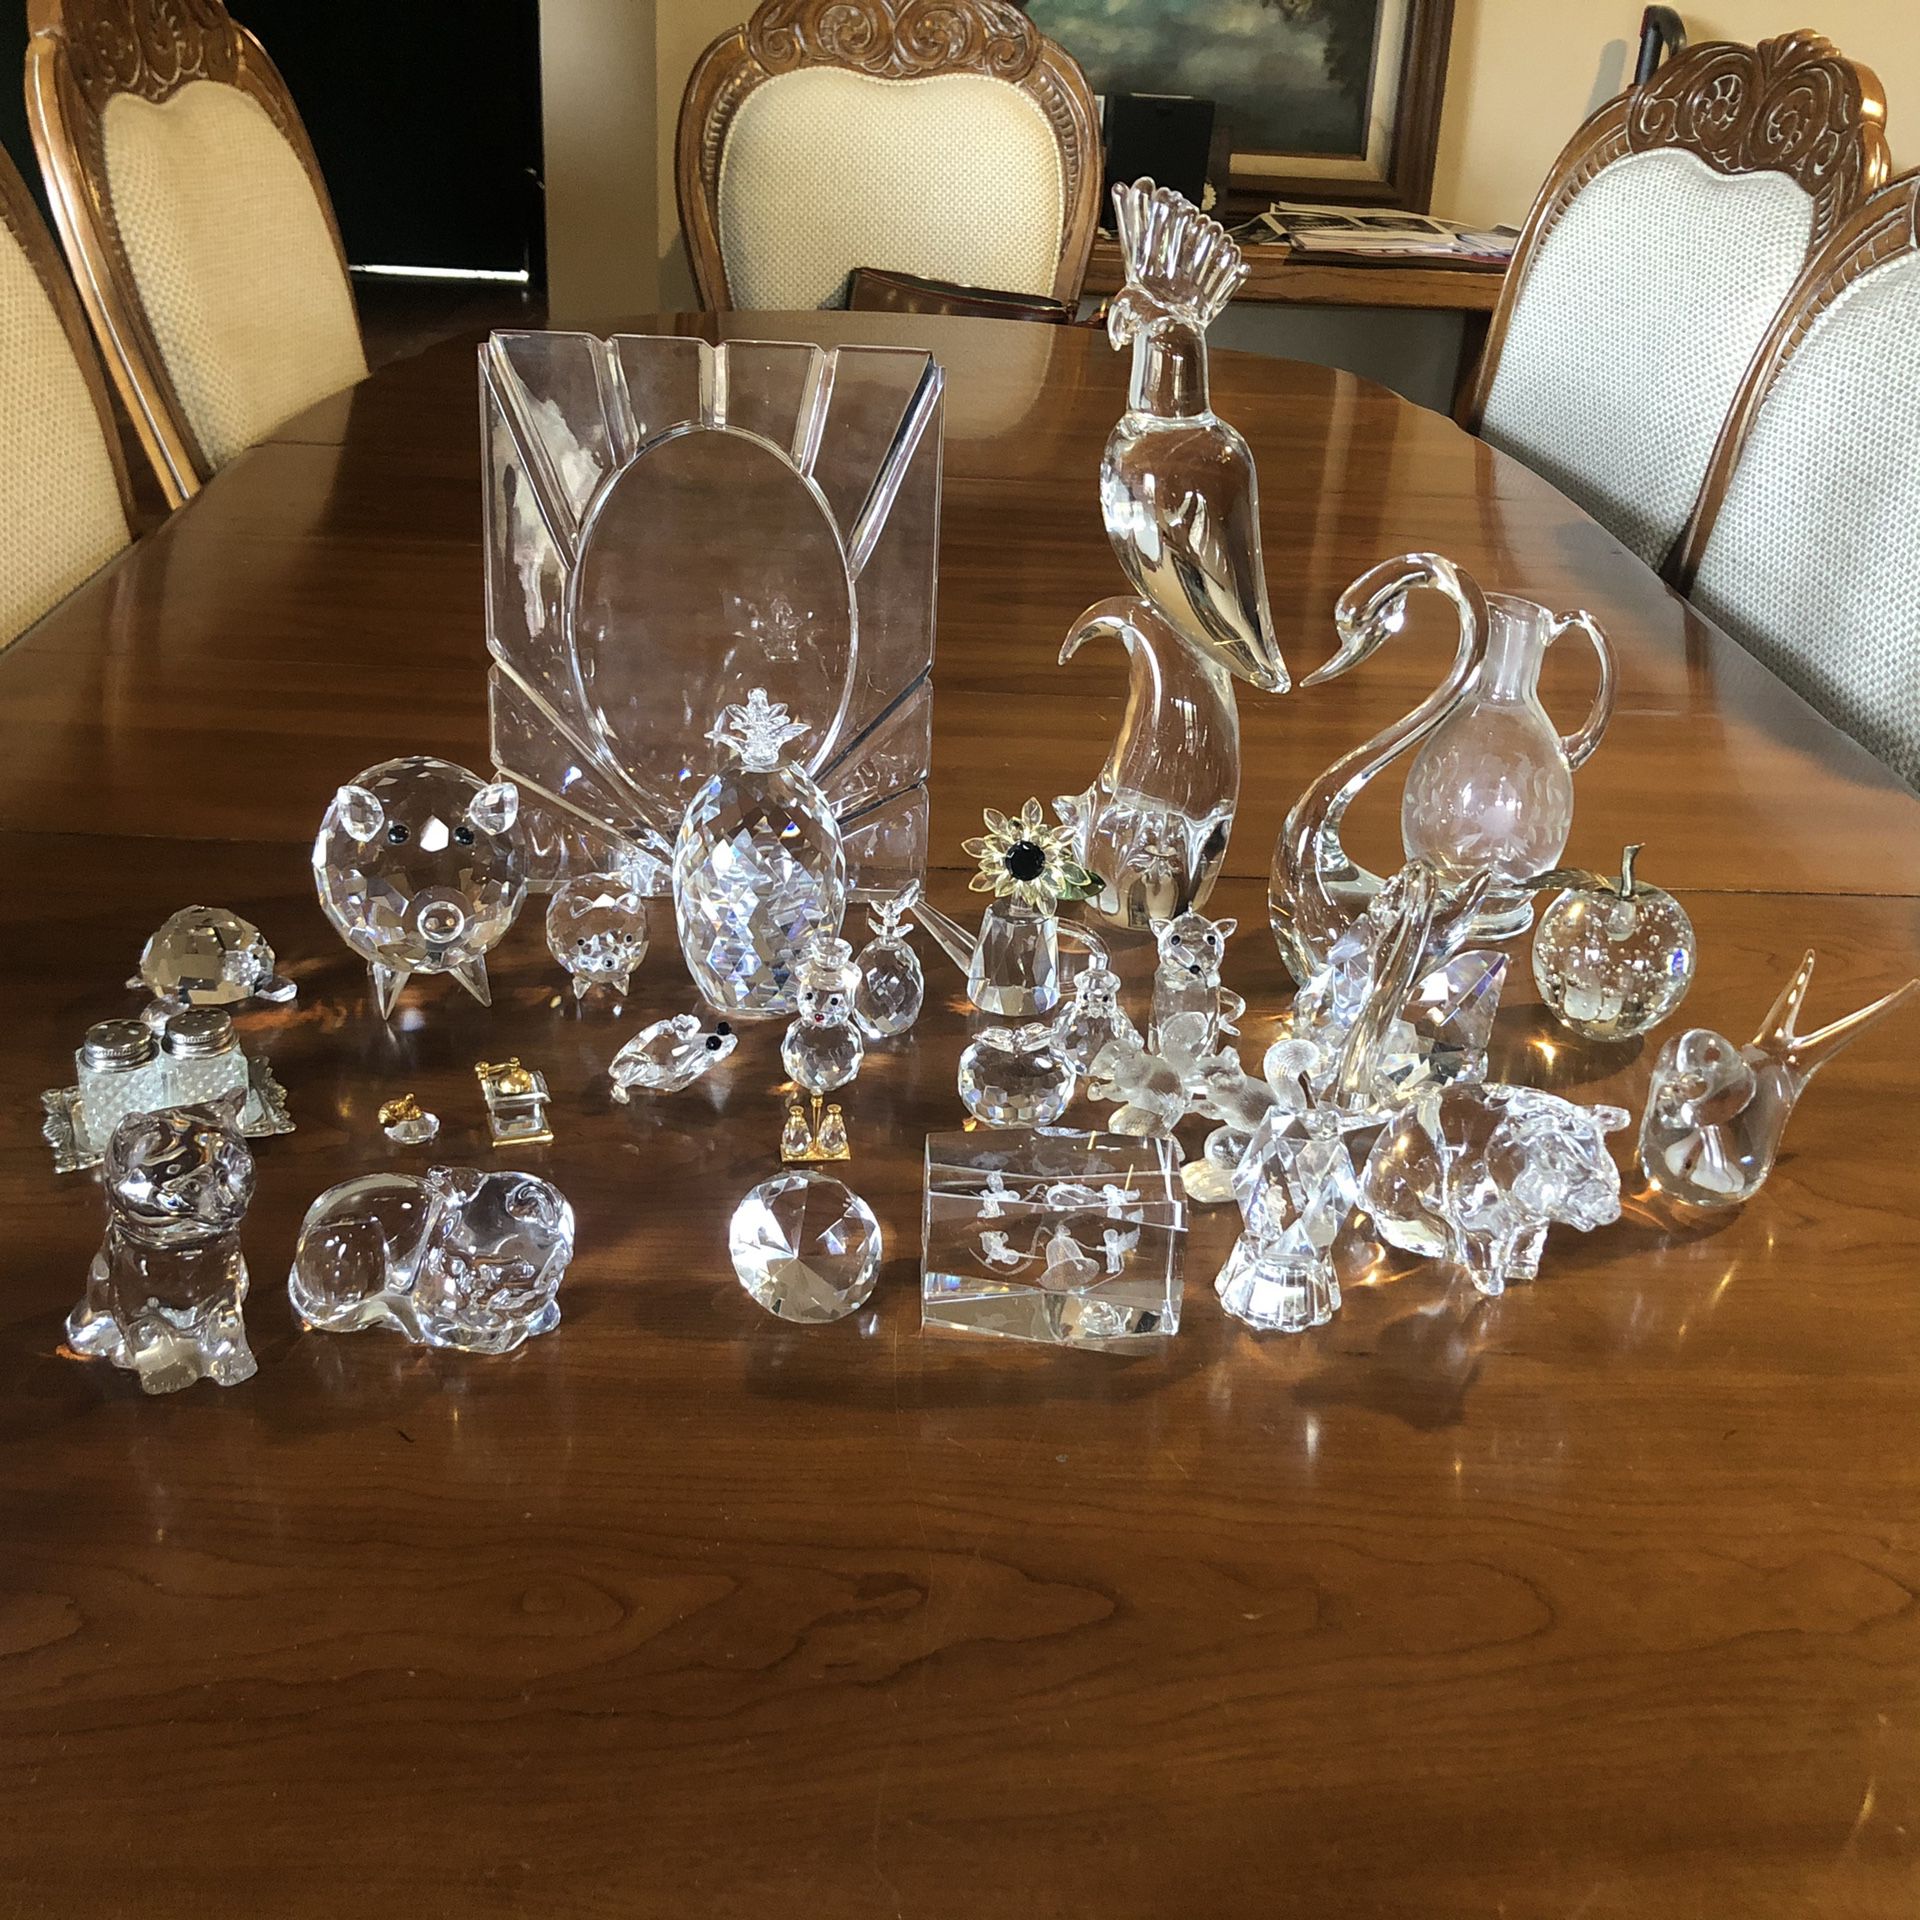 $20 for all Must pick up 4/29 - Collection of glass and crystal figurines decor collectibles vintage boho wedding baby shower gifts